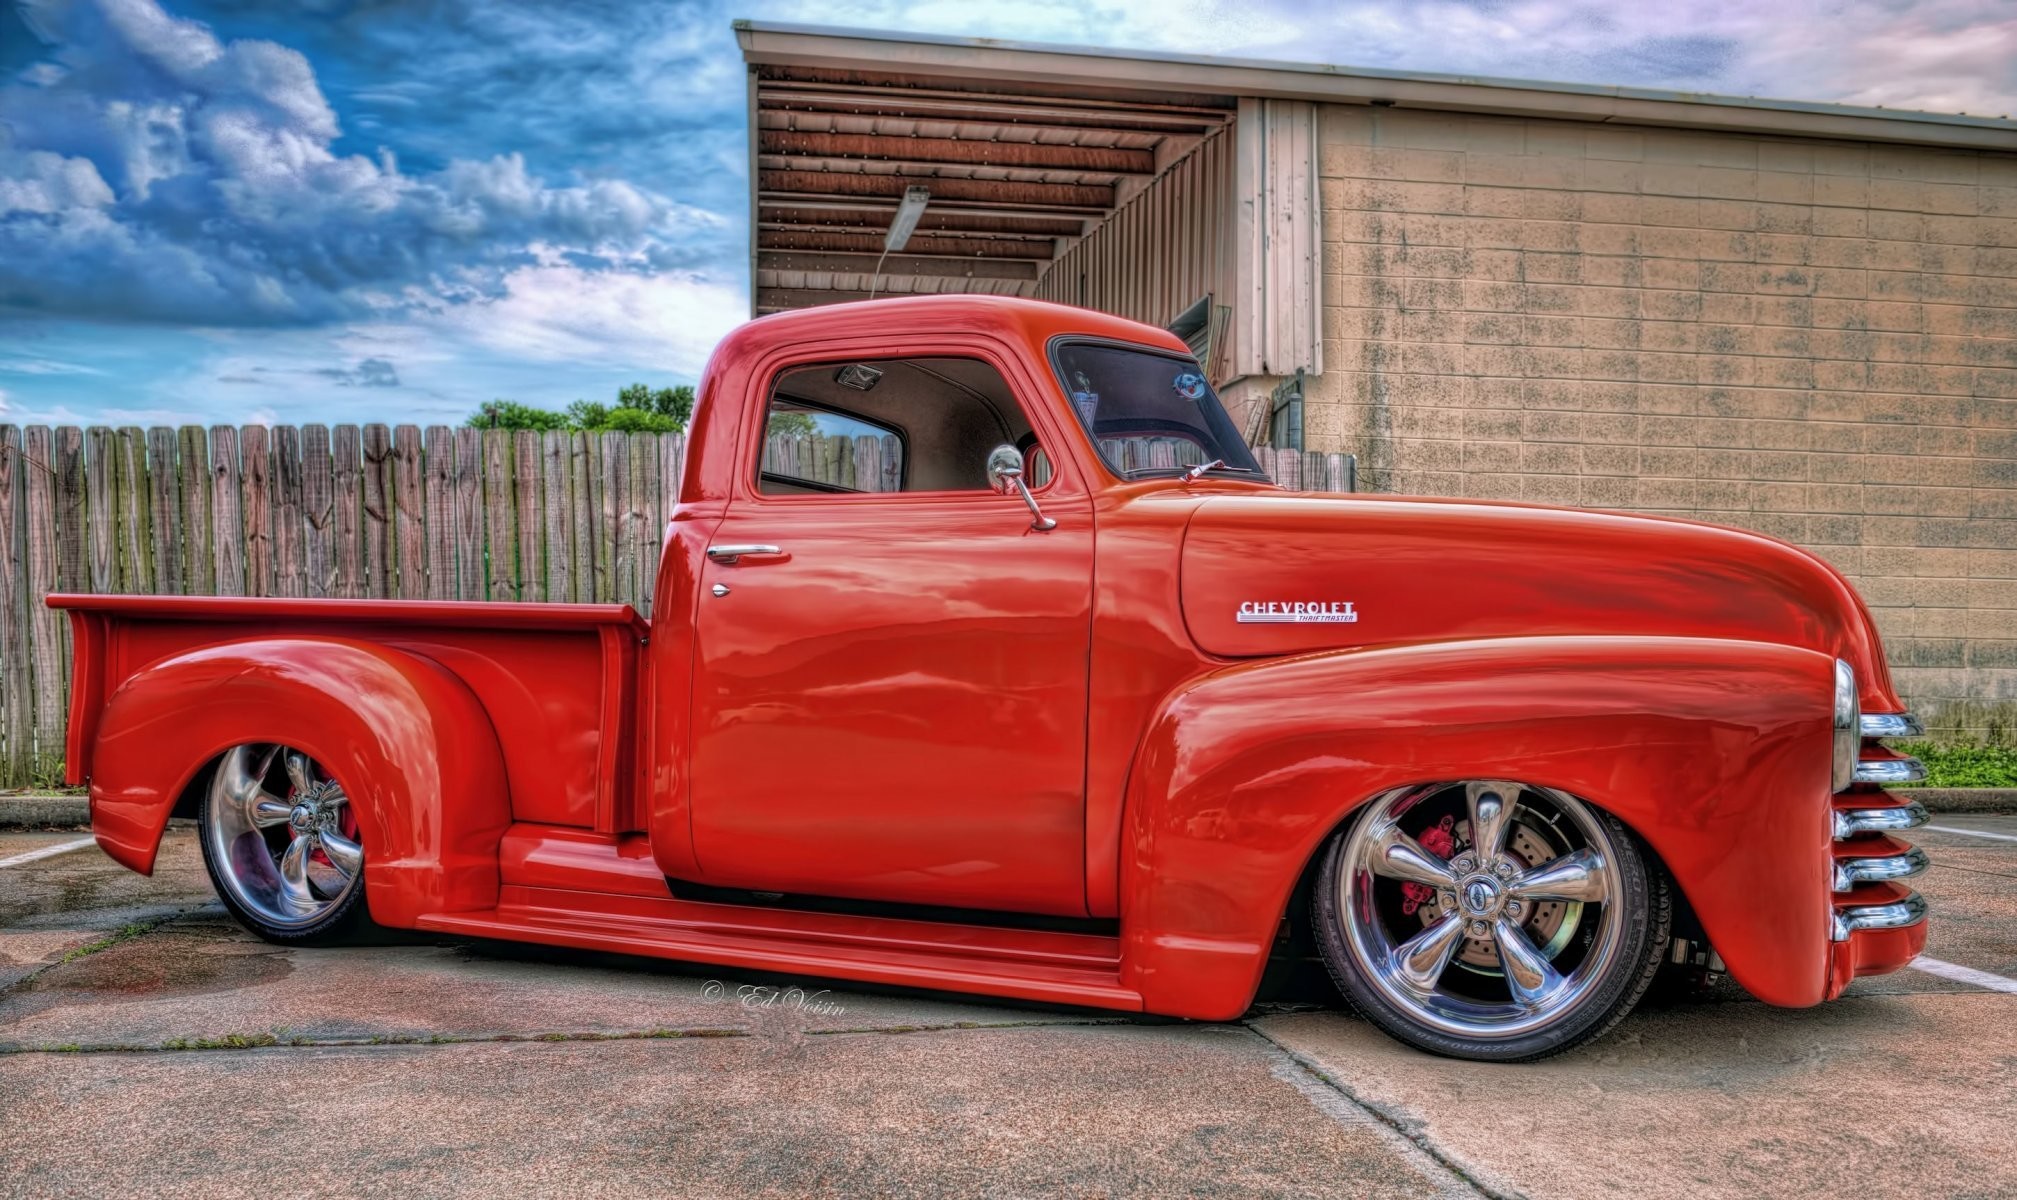 2017x1200 hdr chevy lowrider red red truck